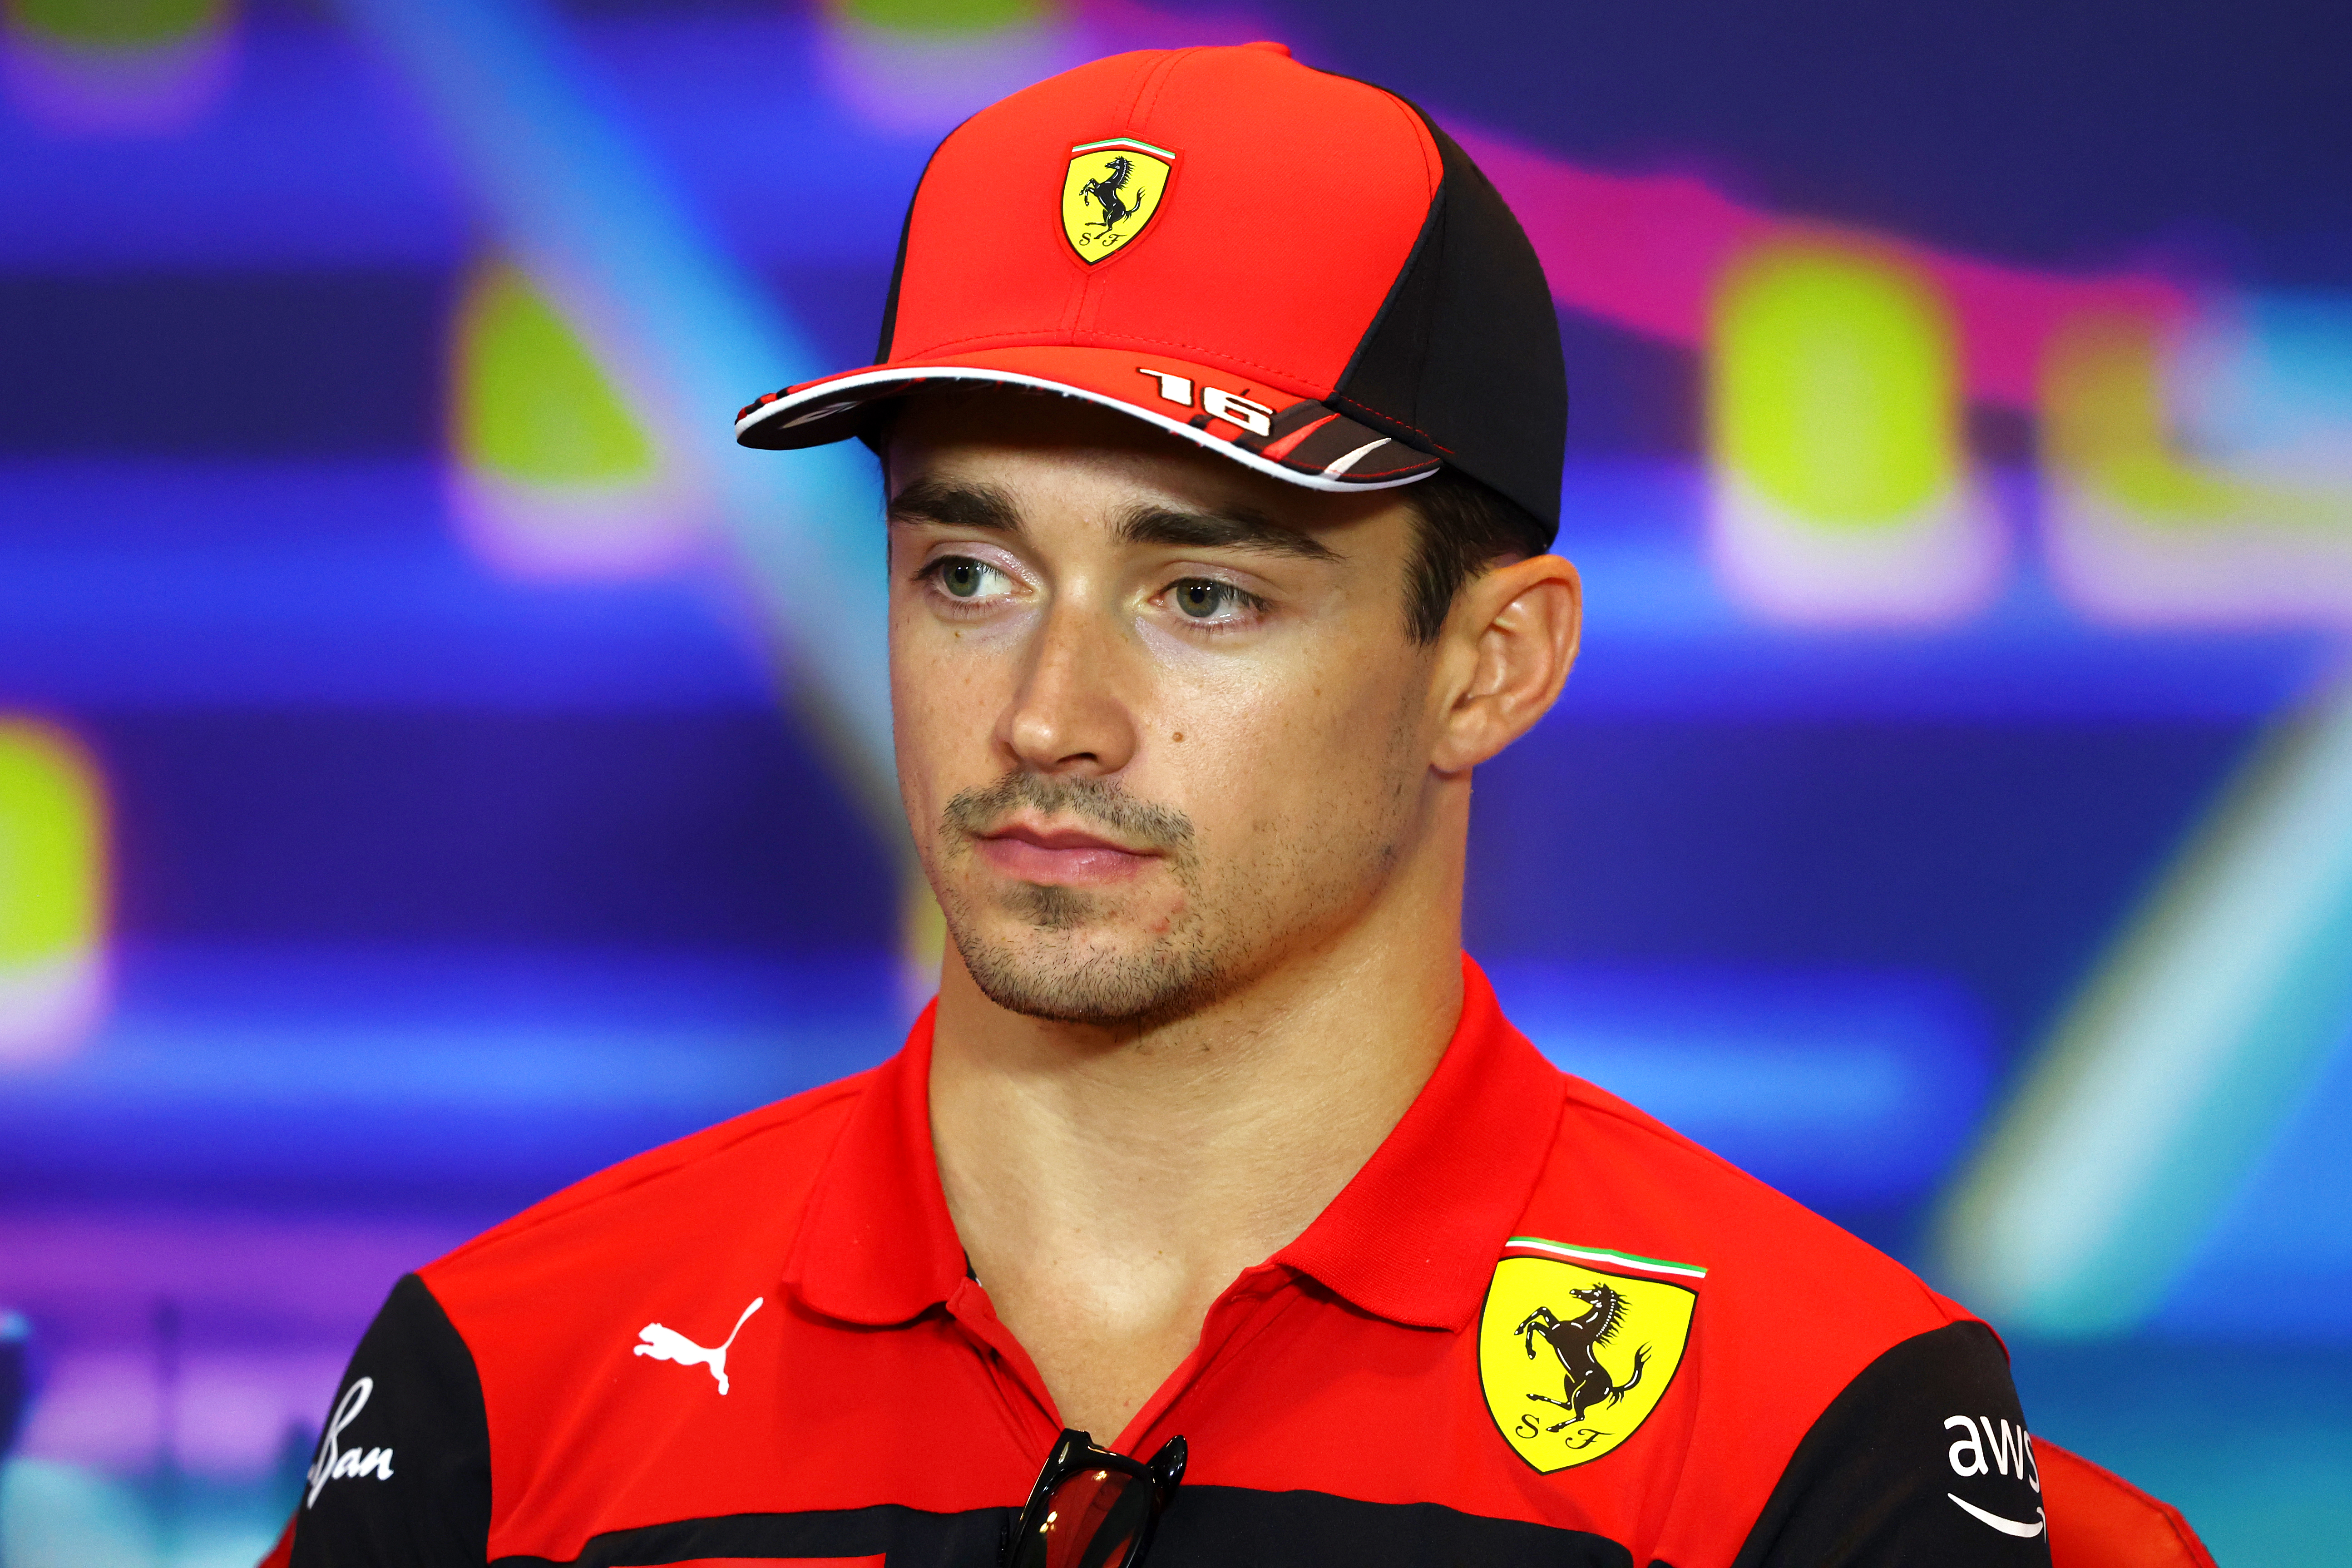 Charles Leclerc of Monaco and Ferrari talks in a press conference during previews ahead of the F1 Grand Prix of Abu Dhabi at Yas Marina Circuit on November 17, 2022 in Abu Dhabi, United Arab Emirates.